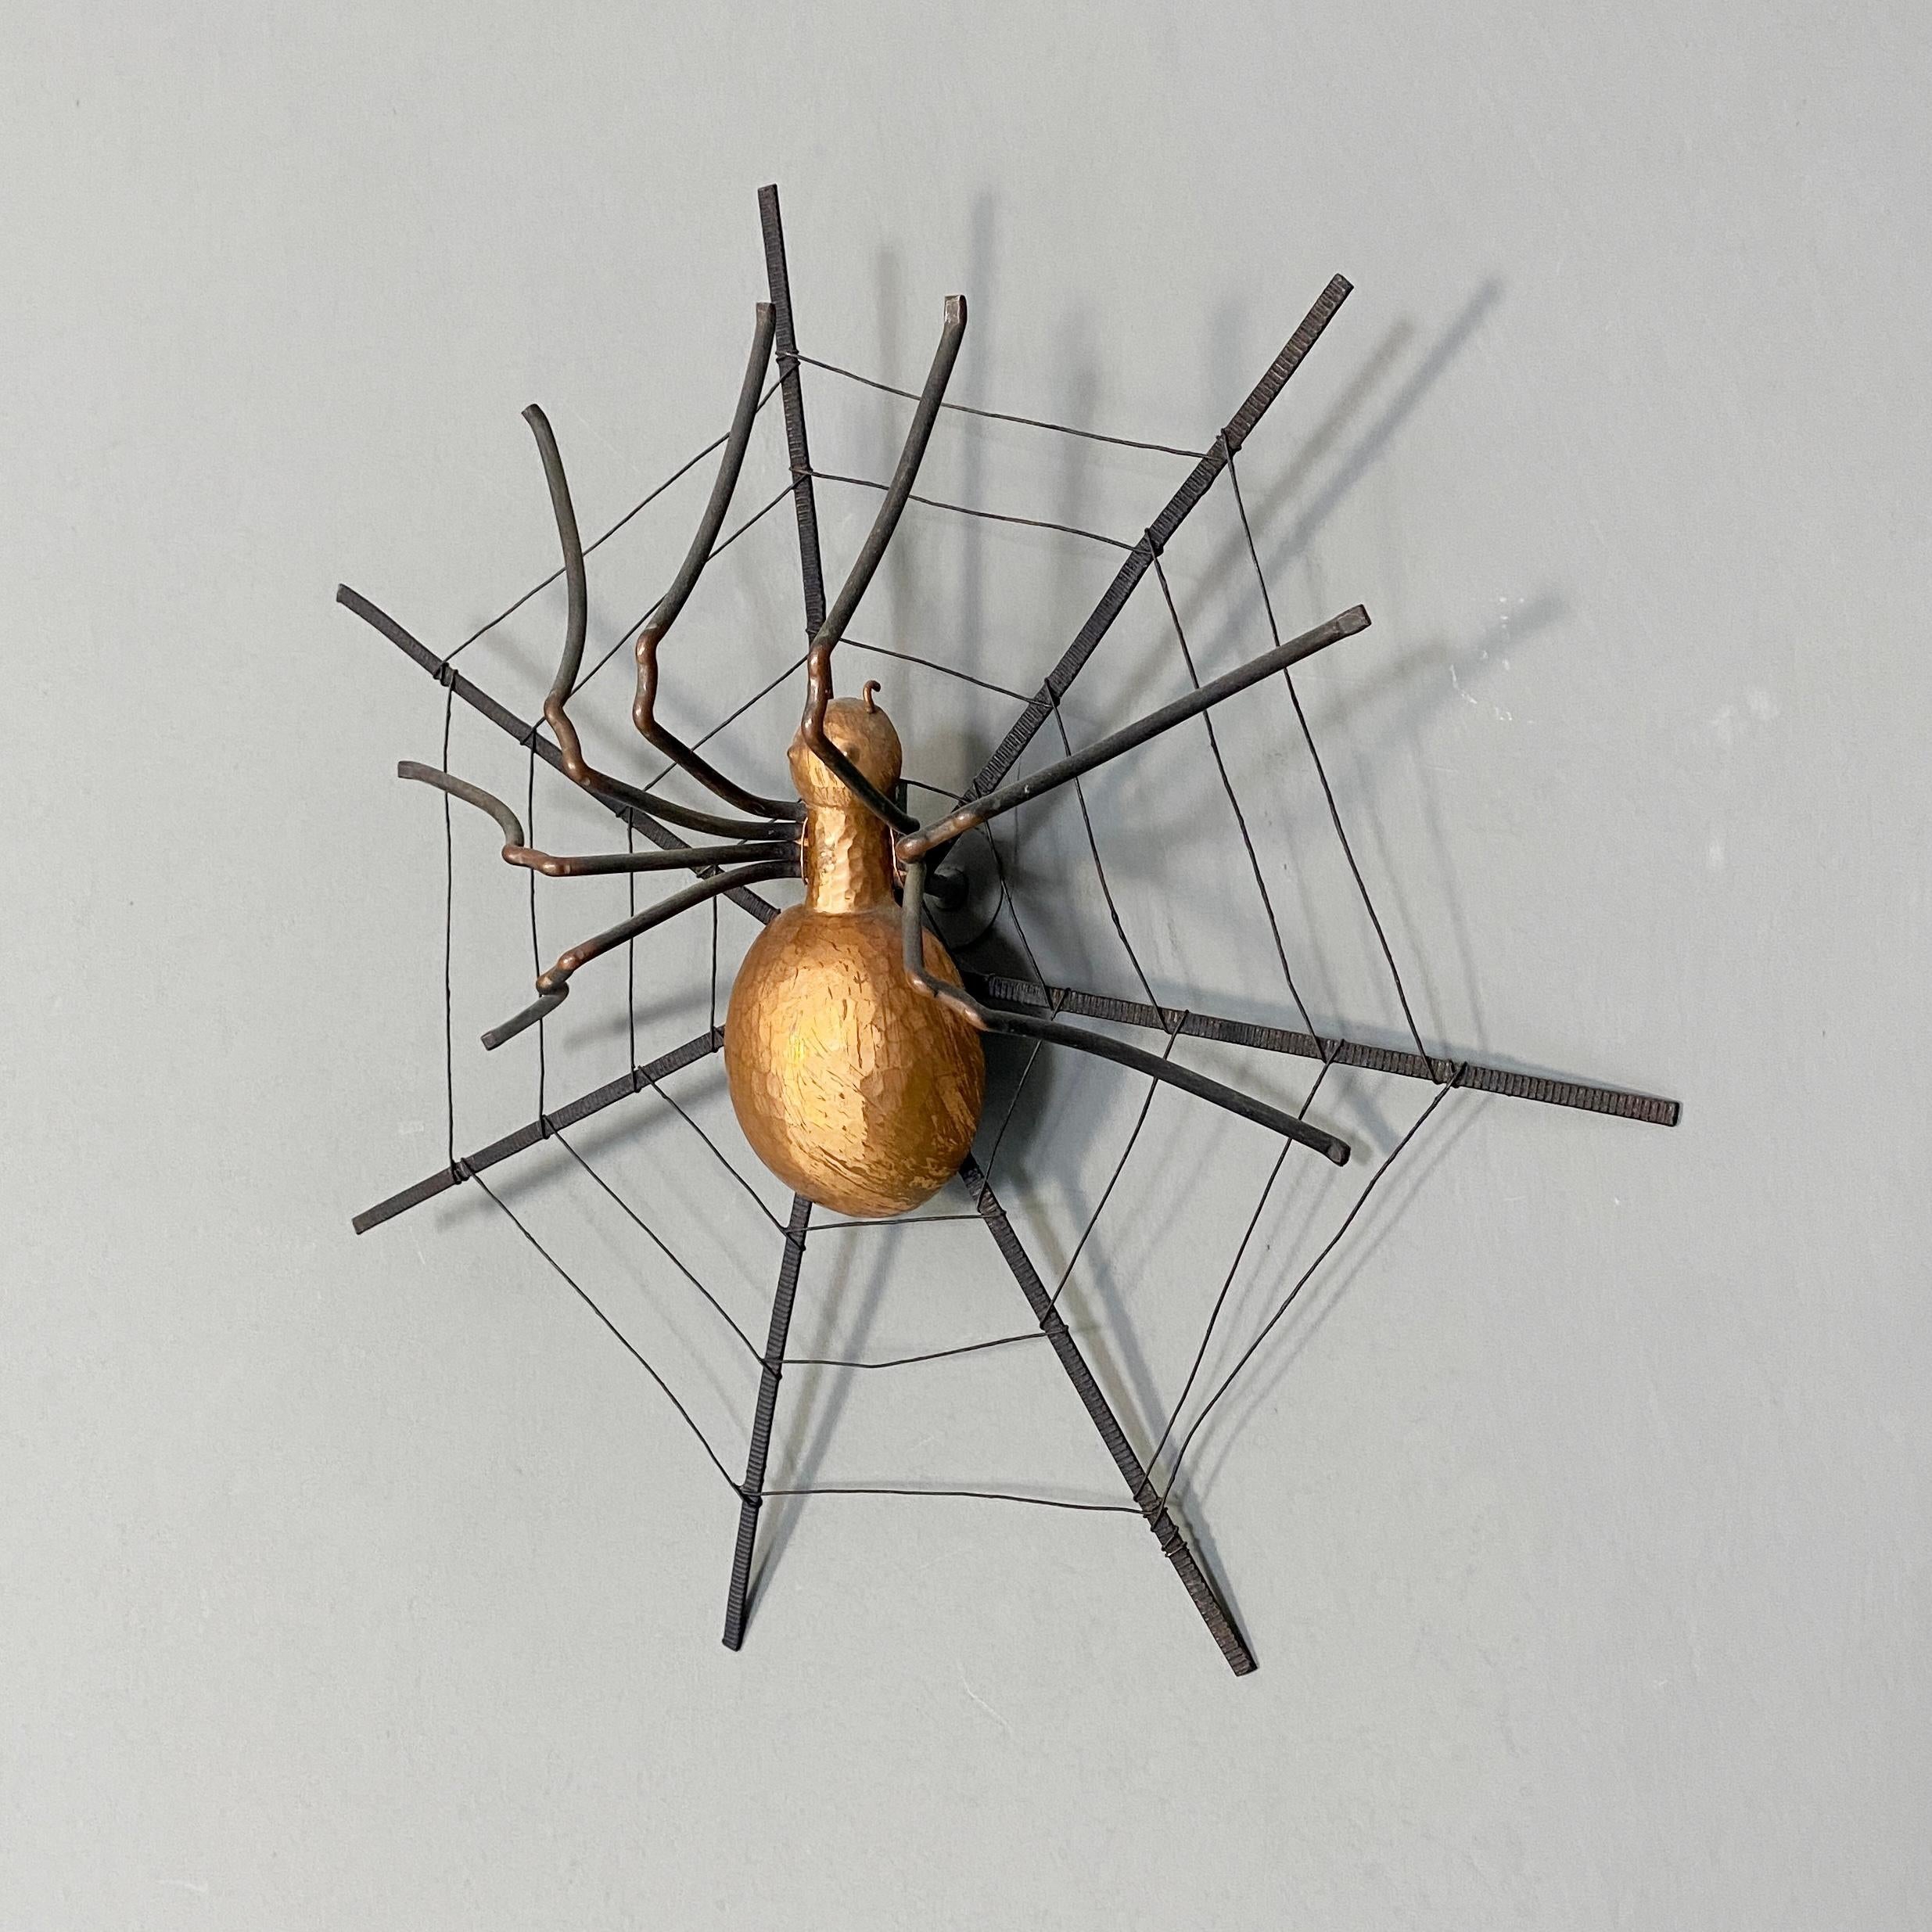 Mid-20th Century Italian Mid-Century Modern Spider-Shaped Wall Decoration, 1960s For Sale